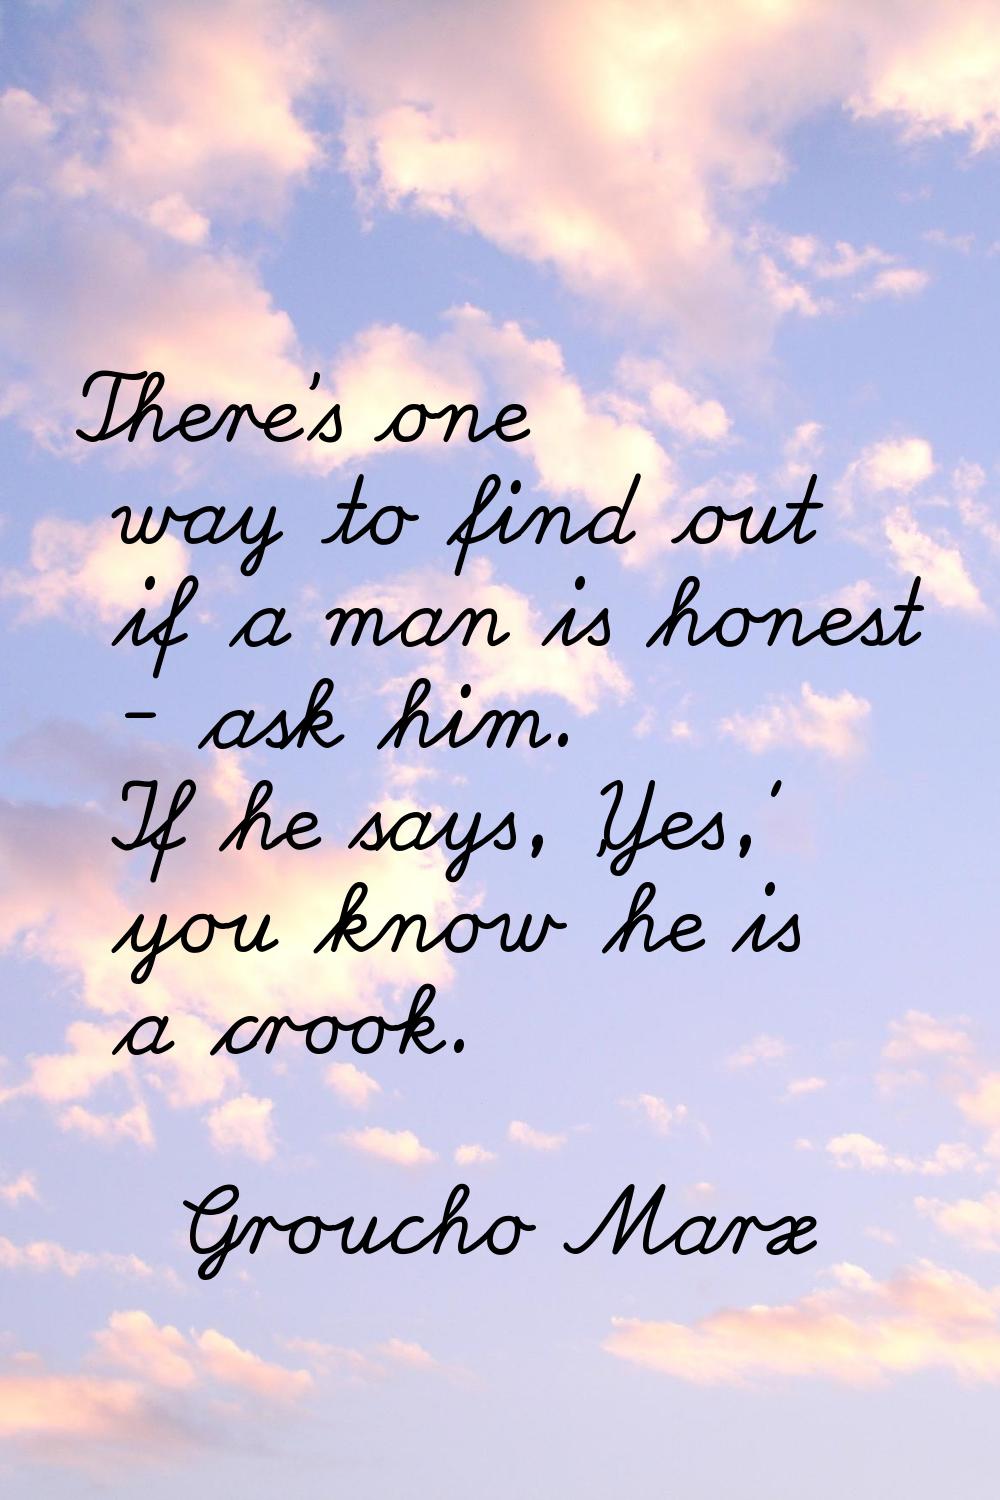 There's one way to find out if a man is honest - ask him. If he says, 'Yes,' you know he is a crook